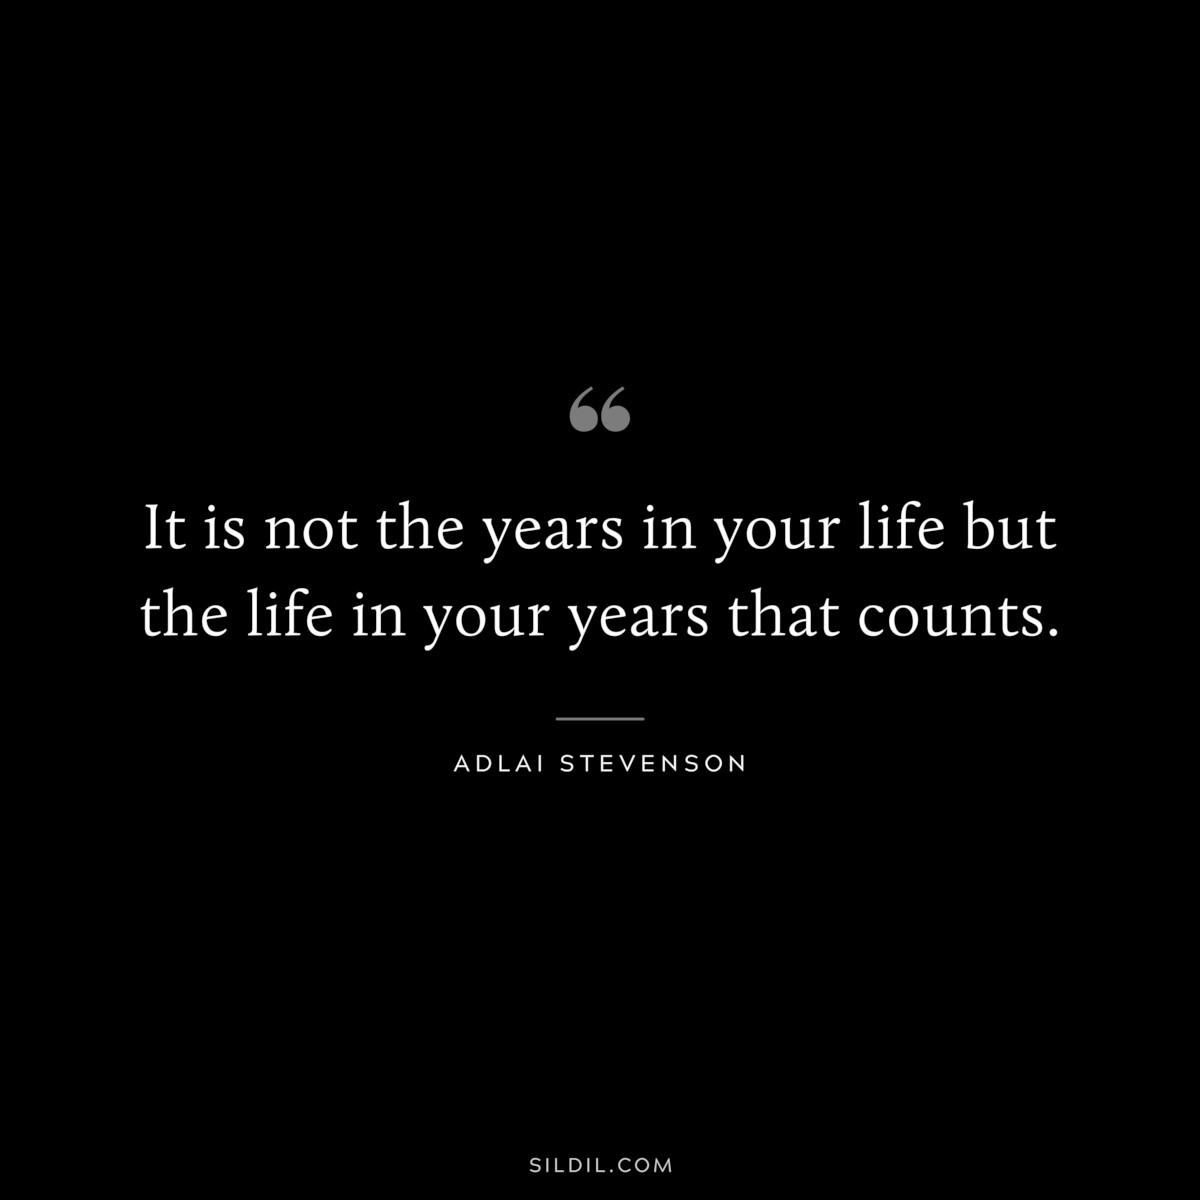 It is not the years in your life but the life in your years that counts. ― Adlai Stevenson